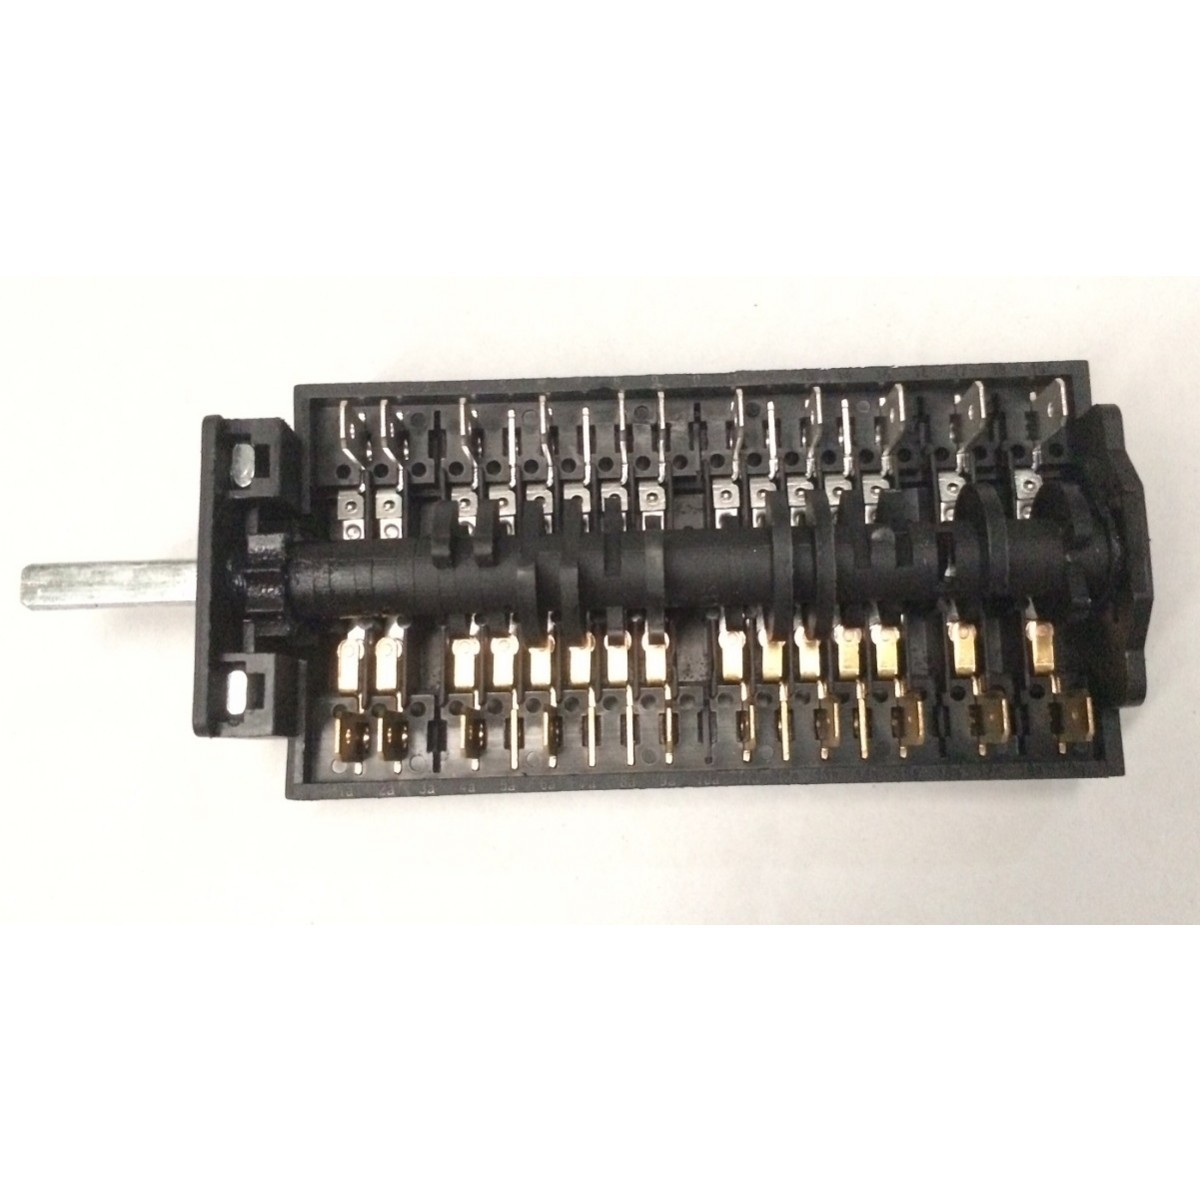 TECHNIKA SELECTOR SWITCH 8 POS MODEL GHE09T